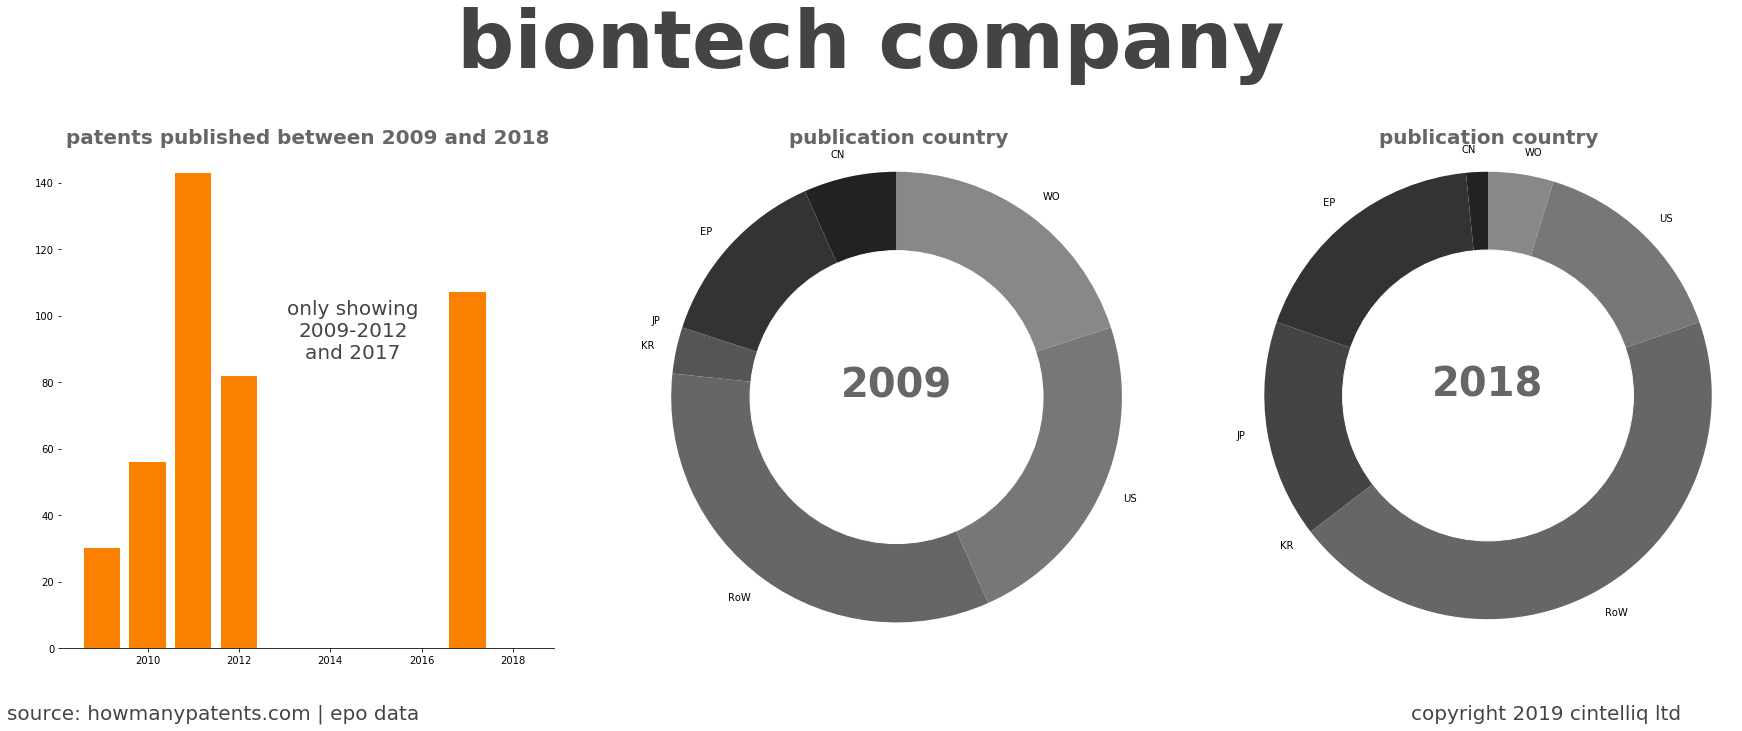 summary of patents for Biontech Company